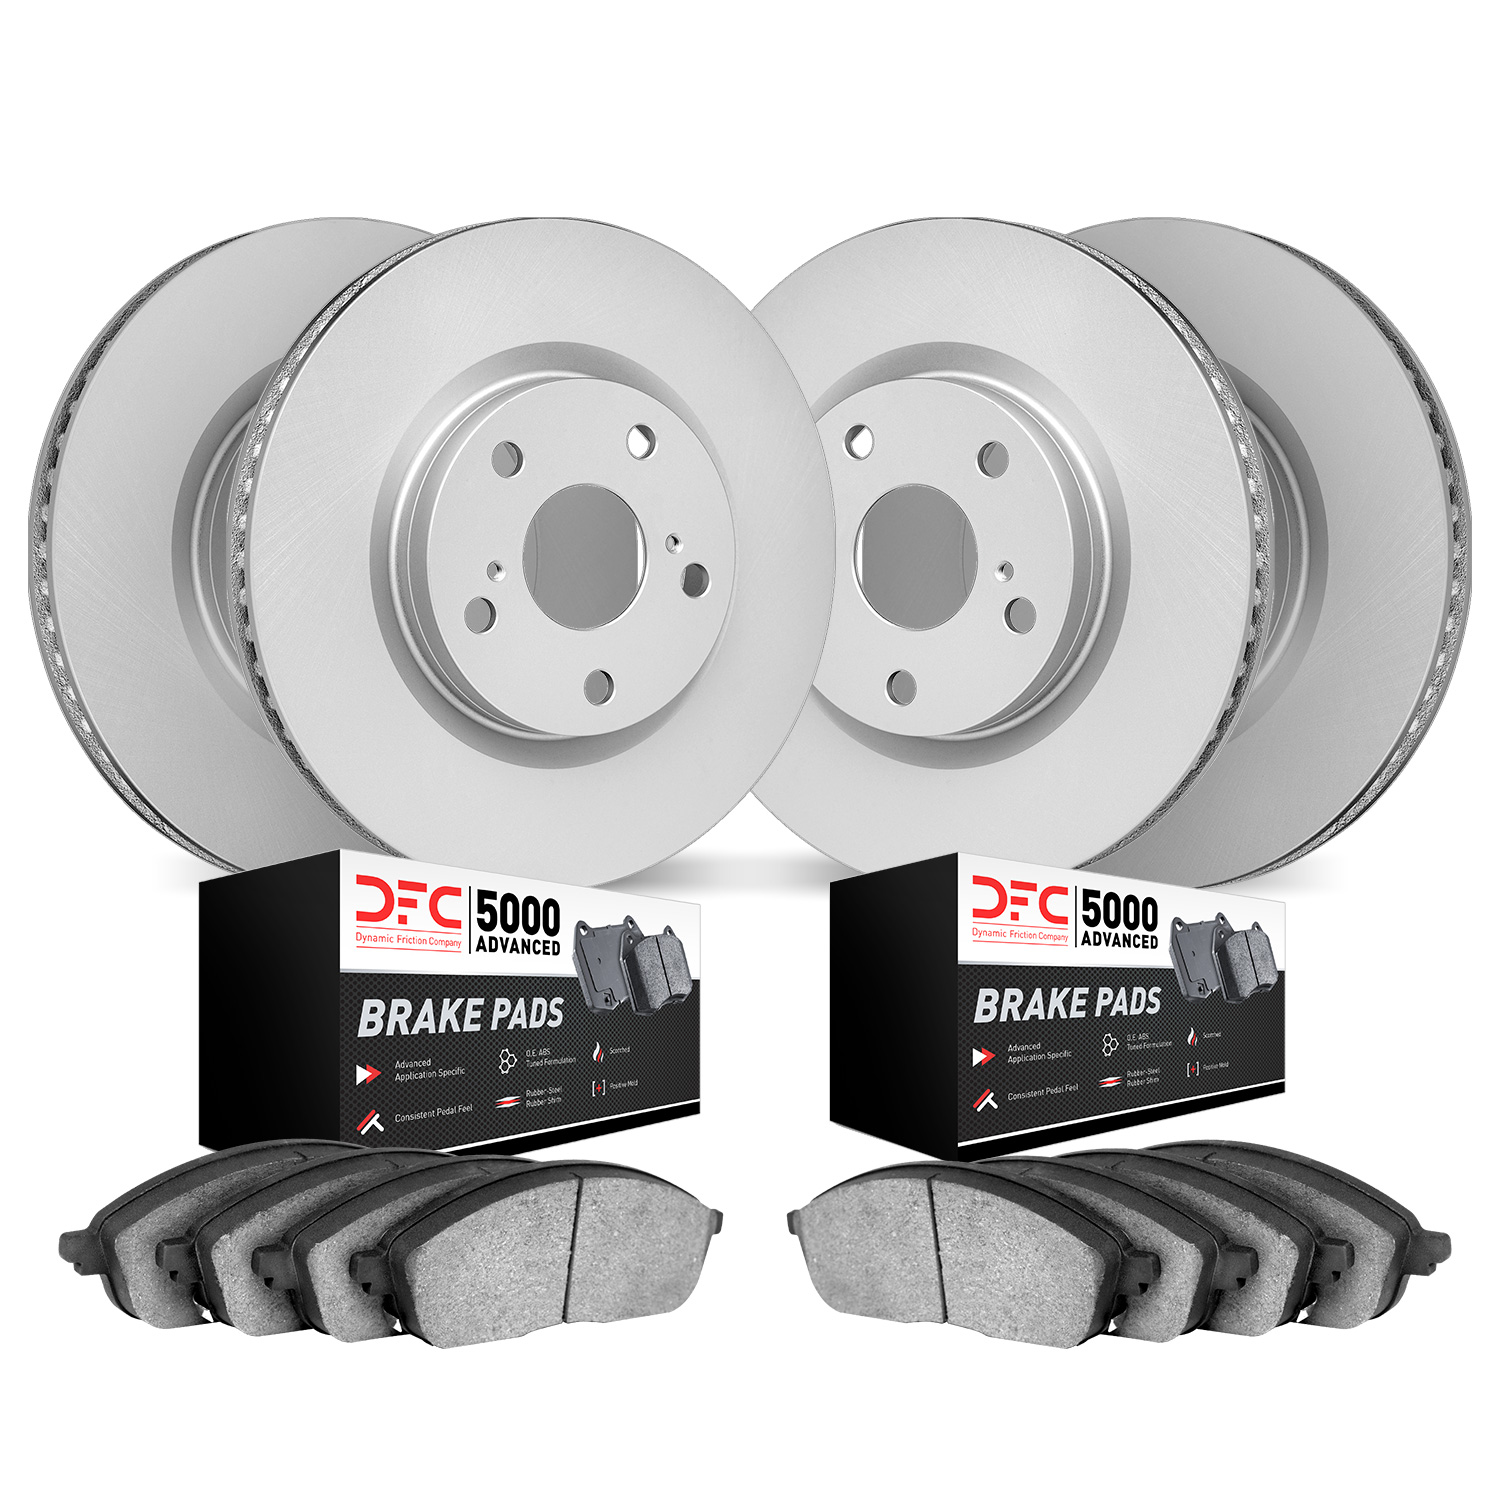 4504-31161 Geospec Brake Rotors w/5000 Advanced Brake Pads Kit, Fits Select BMW, Position: Front and Rear